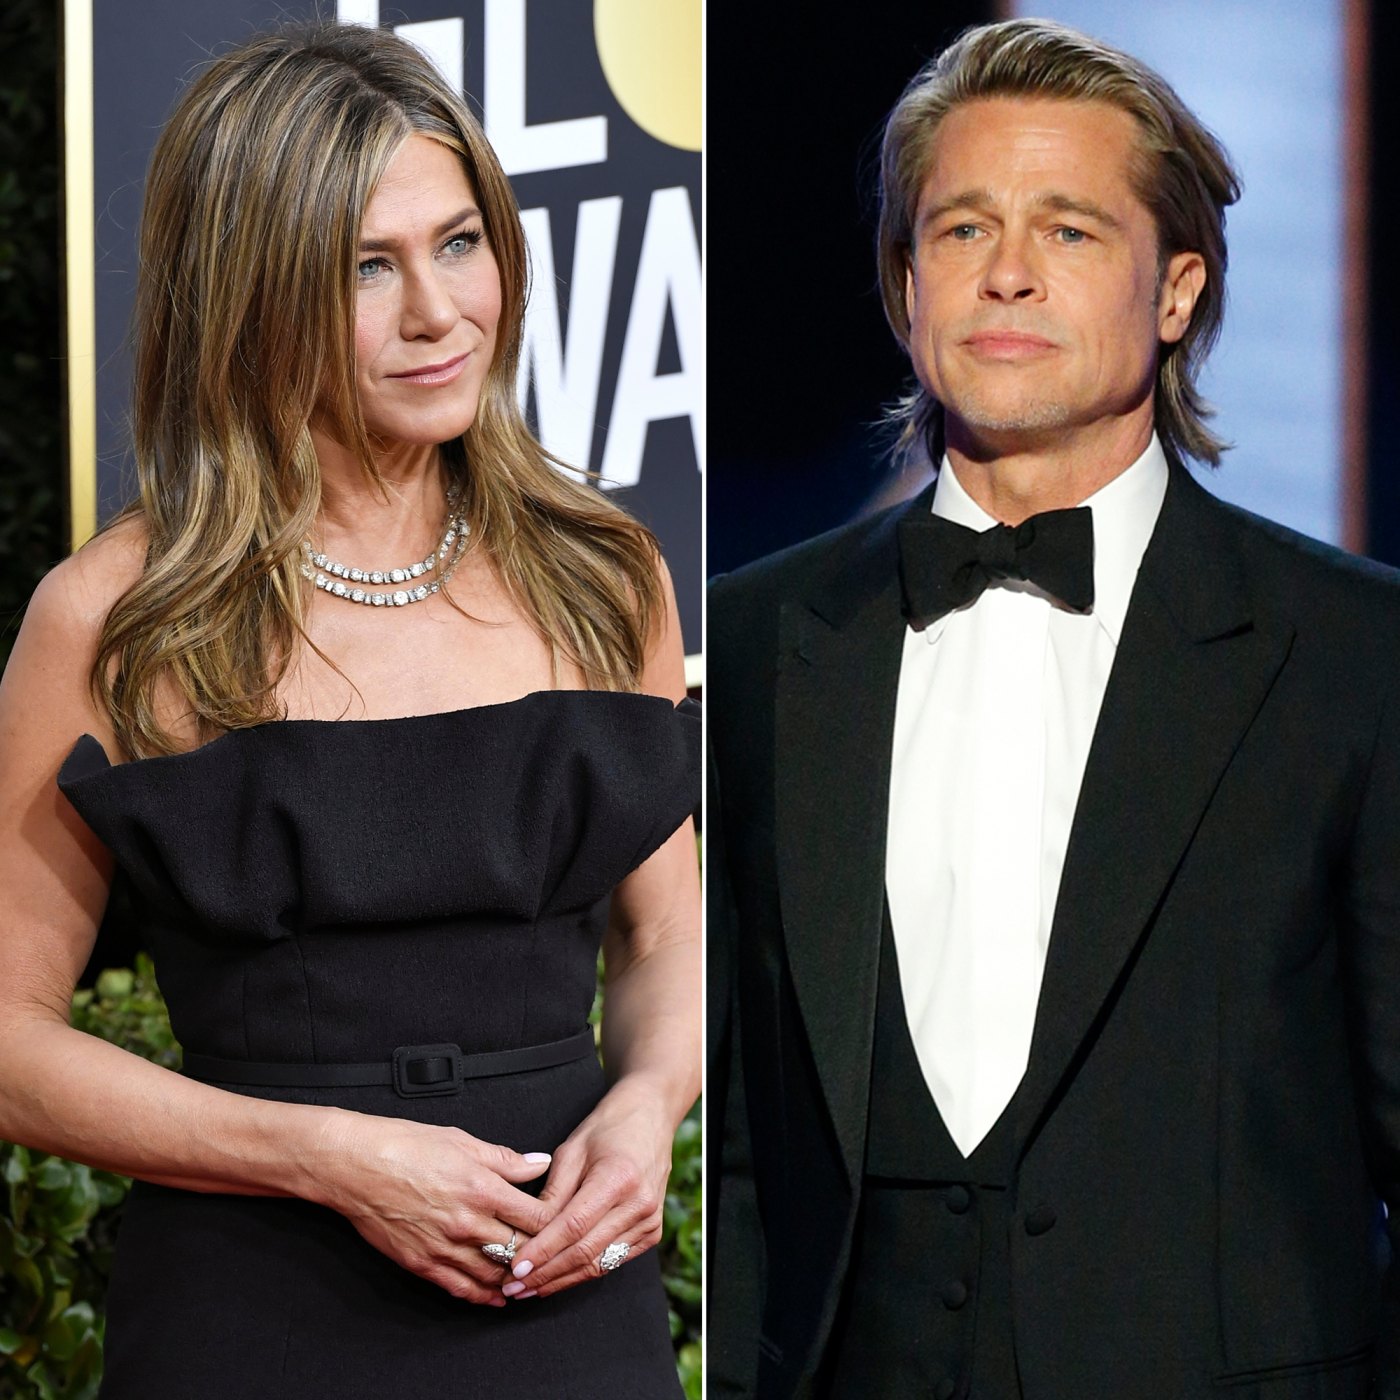 Jennifer Aniston Cheers on Brad Pitt at the Golden Globes 2020 Us Weekly